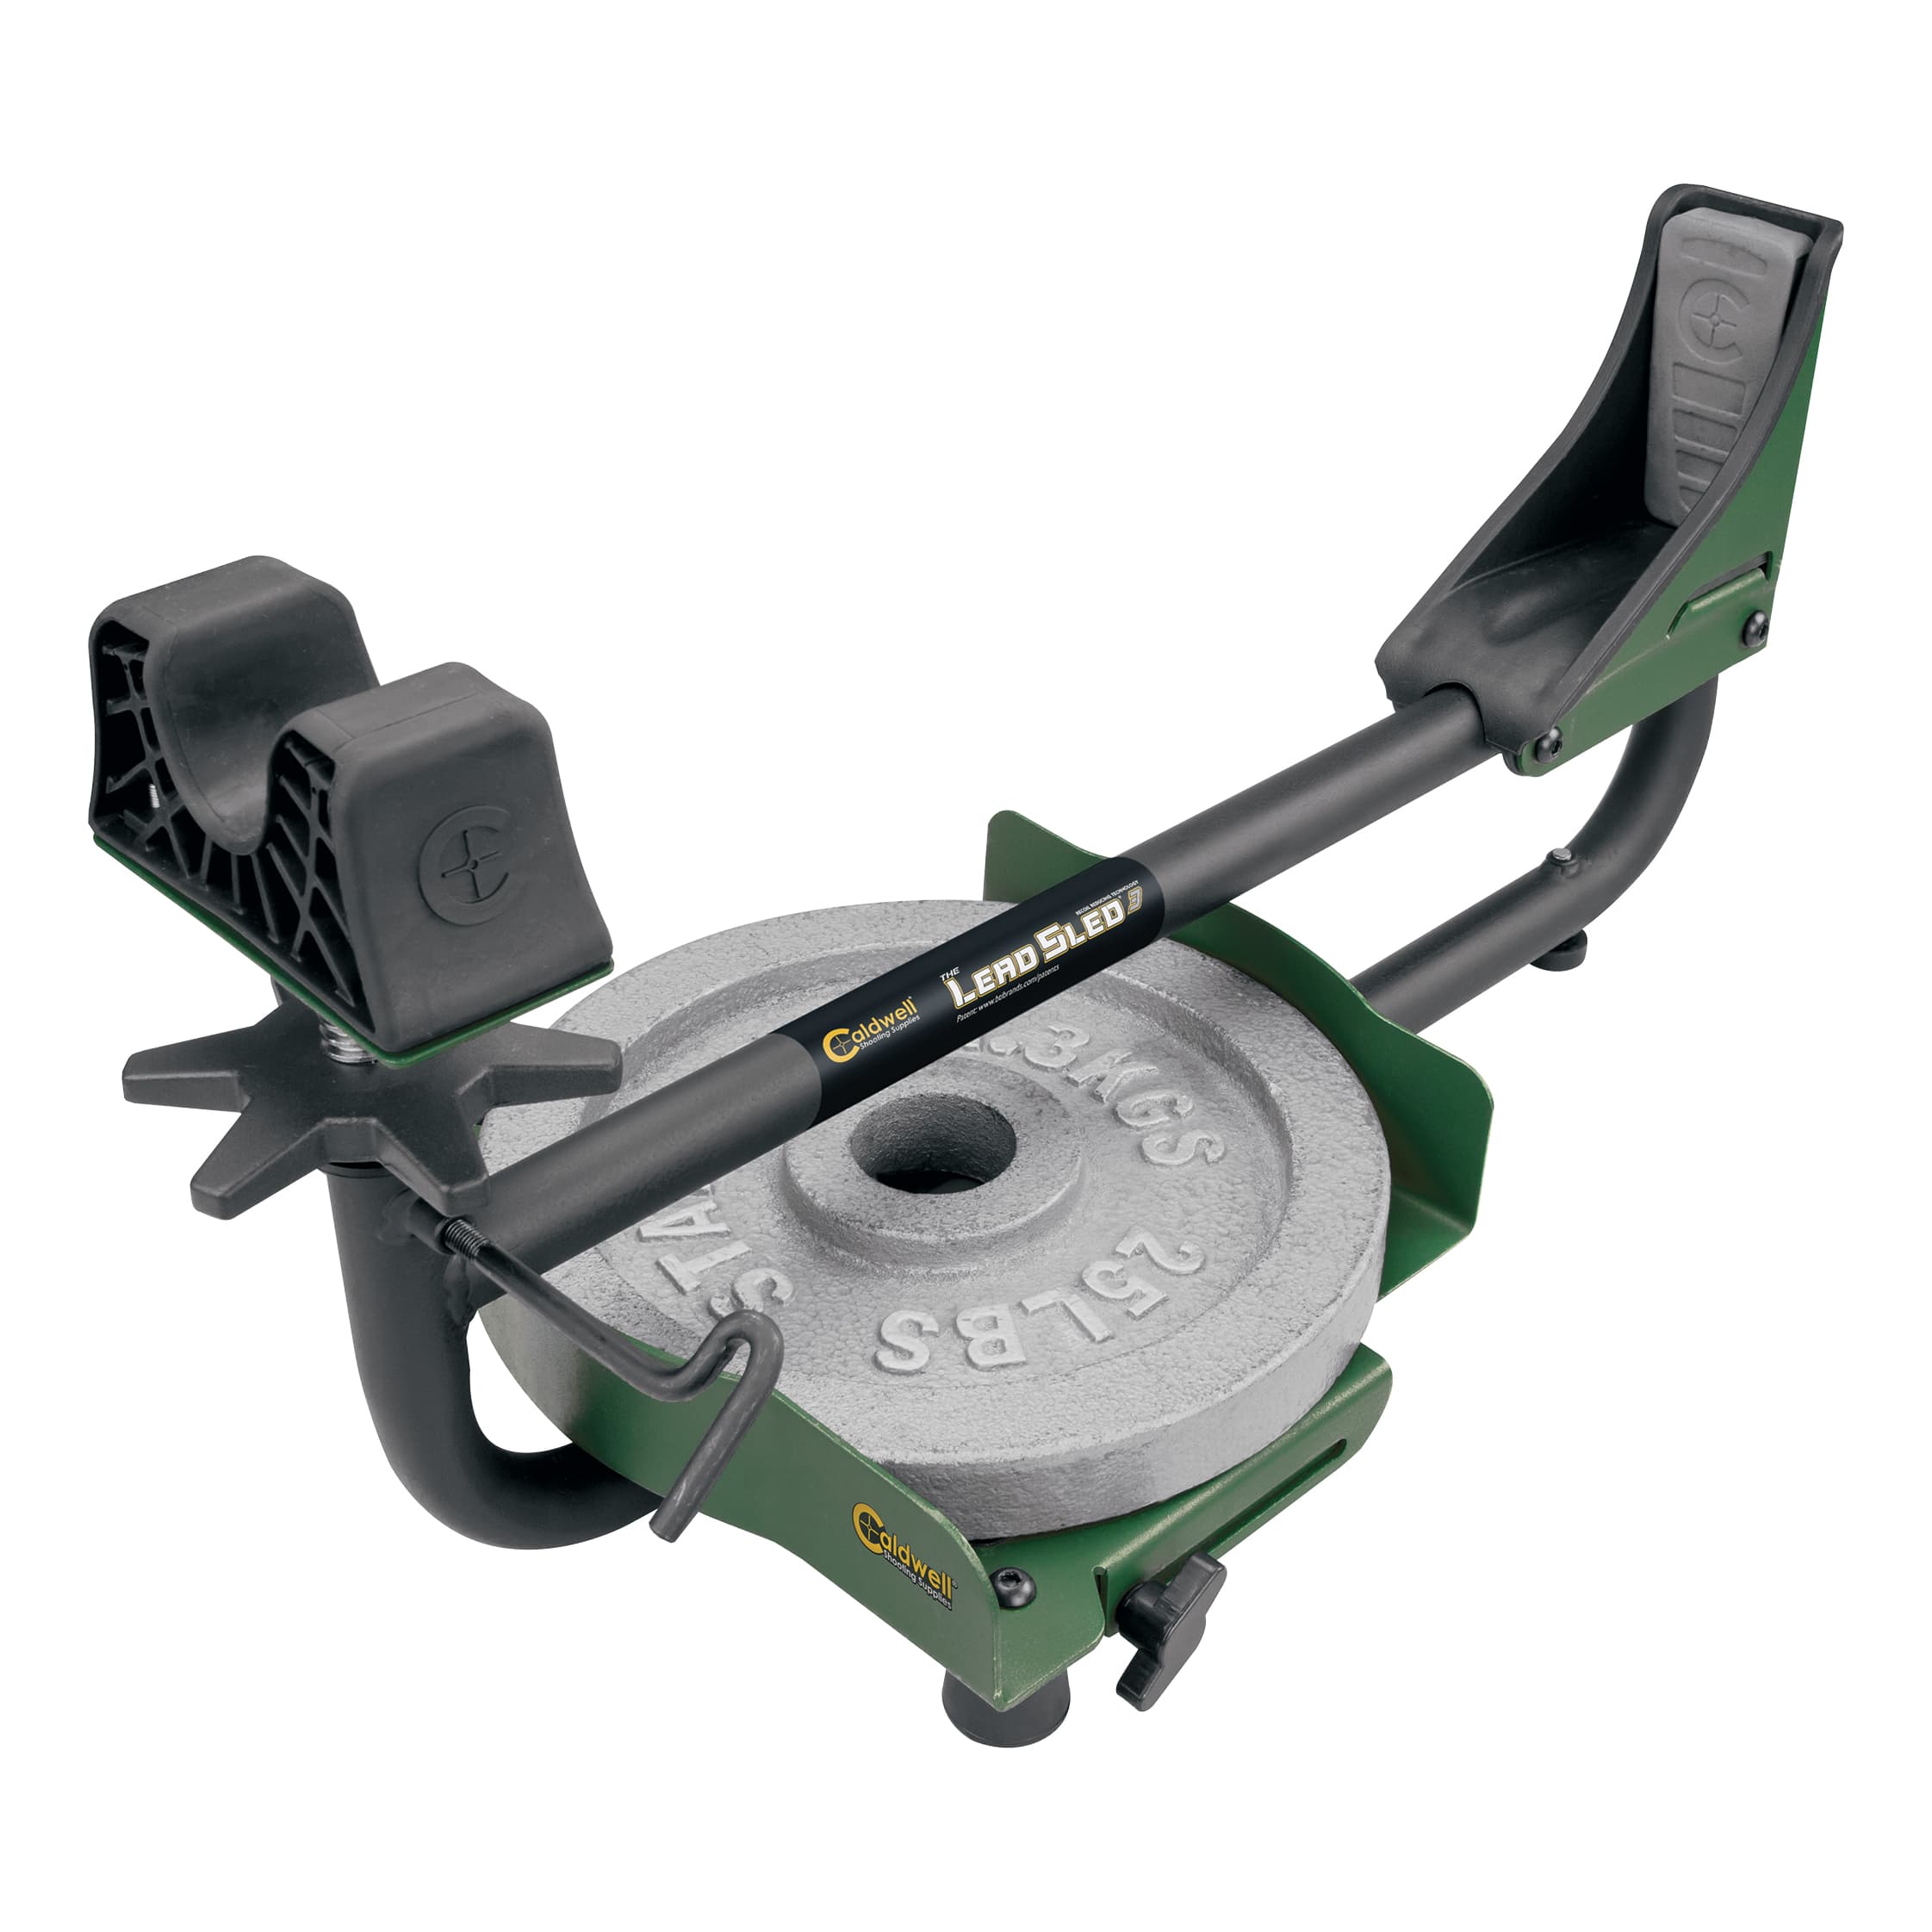 Caldwell® Lead-Sled Plus 3 Shooting Rest - Adjustable Weight Tray Accommodates a Variety of Weight Types